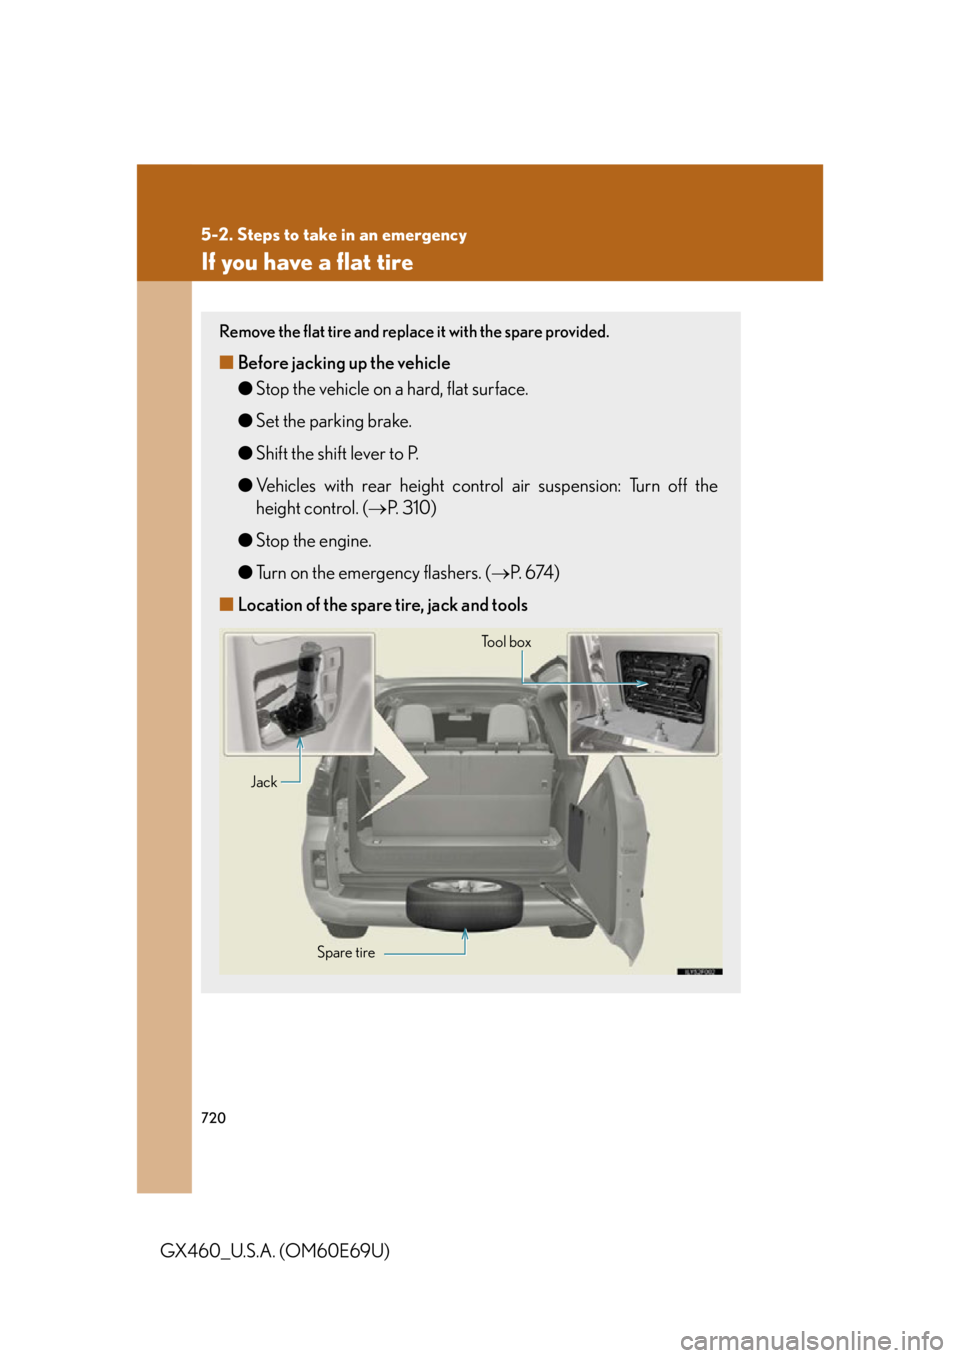 Lexus GX460 2010  Operating Other Driving Systems / LEXUS 2010 GX460 OWNERS MANUAL (OM60E69U) 720
5-2. Steps to take in an emergency
GX460_U.S.A. (OM60E69U)
If you have a flat tire
Remove the flat tire and replace it with the spare provided.
■Before jacking up the vehicle
●Stop the vehicle